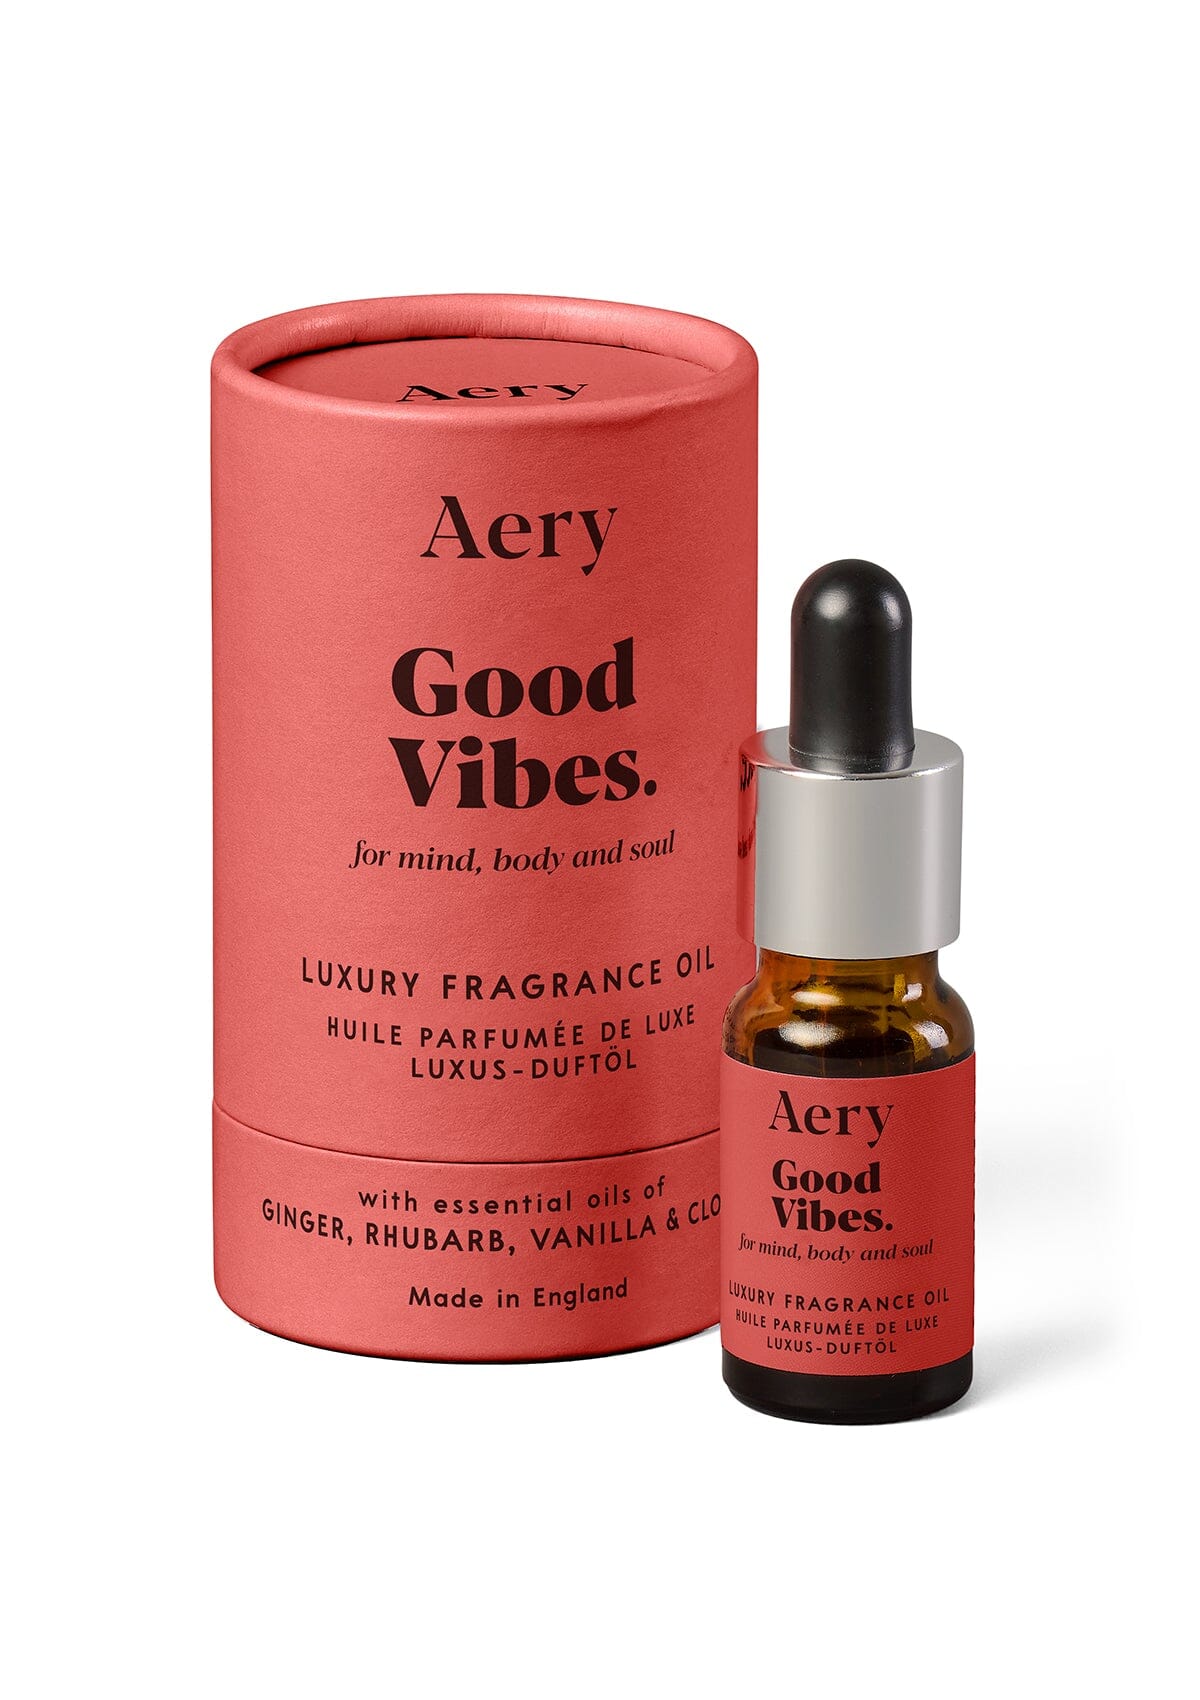 Pink Good Vibes fragrance oil by Aery displayed next to product packaging on white background 